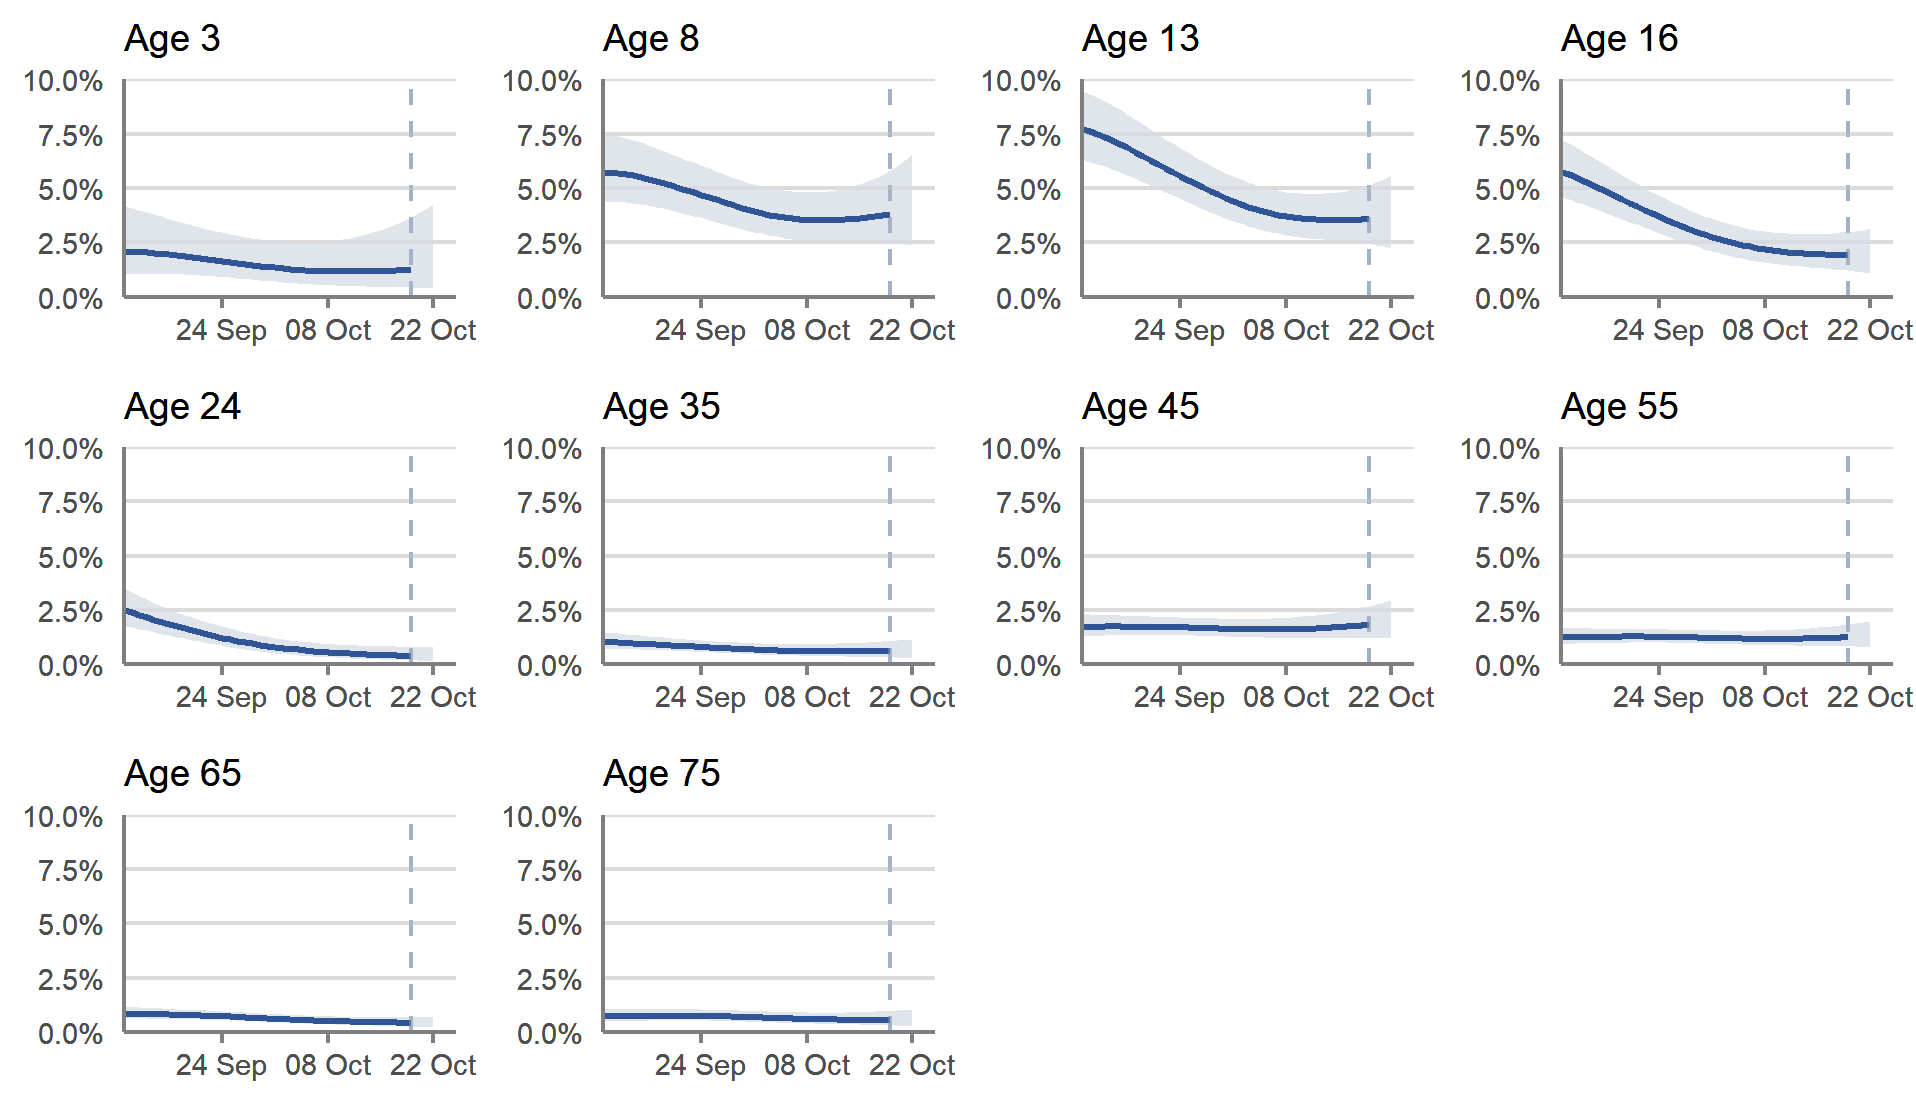 Figure 3: Modelled daily estimates of the percentage of the private residential population in Scotland testing positive for COVID-19, by reference age, between 12 September and 23 October 2021, including 95% confidence intervals (see notes 2,5,6,8)   This chart shows the percentage of people testing positive for COVID-19 by reference age, between 12 September and 23 October 2021. These estimates are based on modelled daily estimates of the percentage of the private residential population testing positive for COVID-19 in Scotland by single year of age.  The proportion of people testing positive remains higher in the younger age groups. In recent weeks, the percentage of people living in private households in Scotland testing positive decreased for those of secondary school age and young adults. The trend is uncertain for those of nursery and primary school age and the older ages.